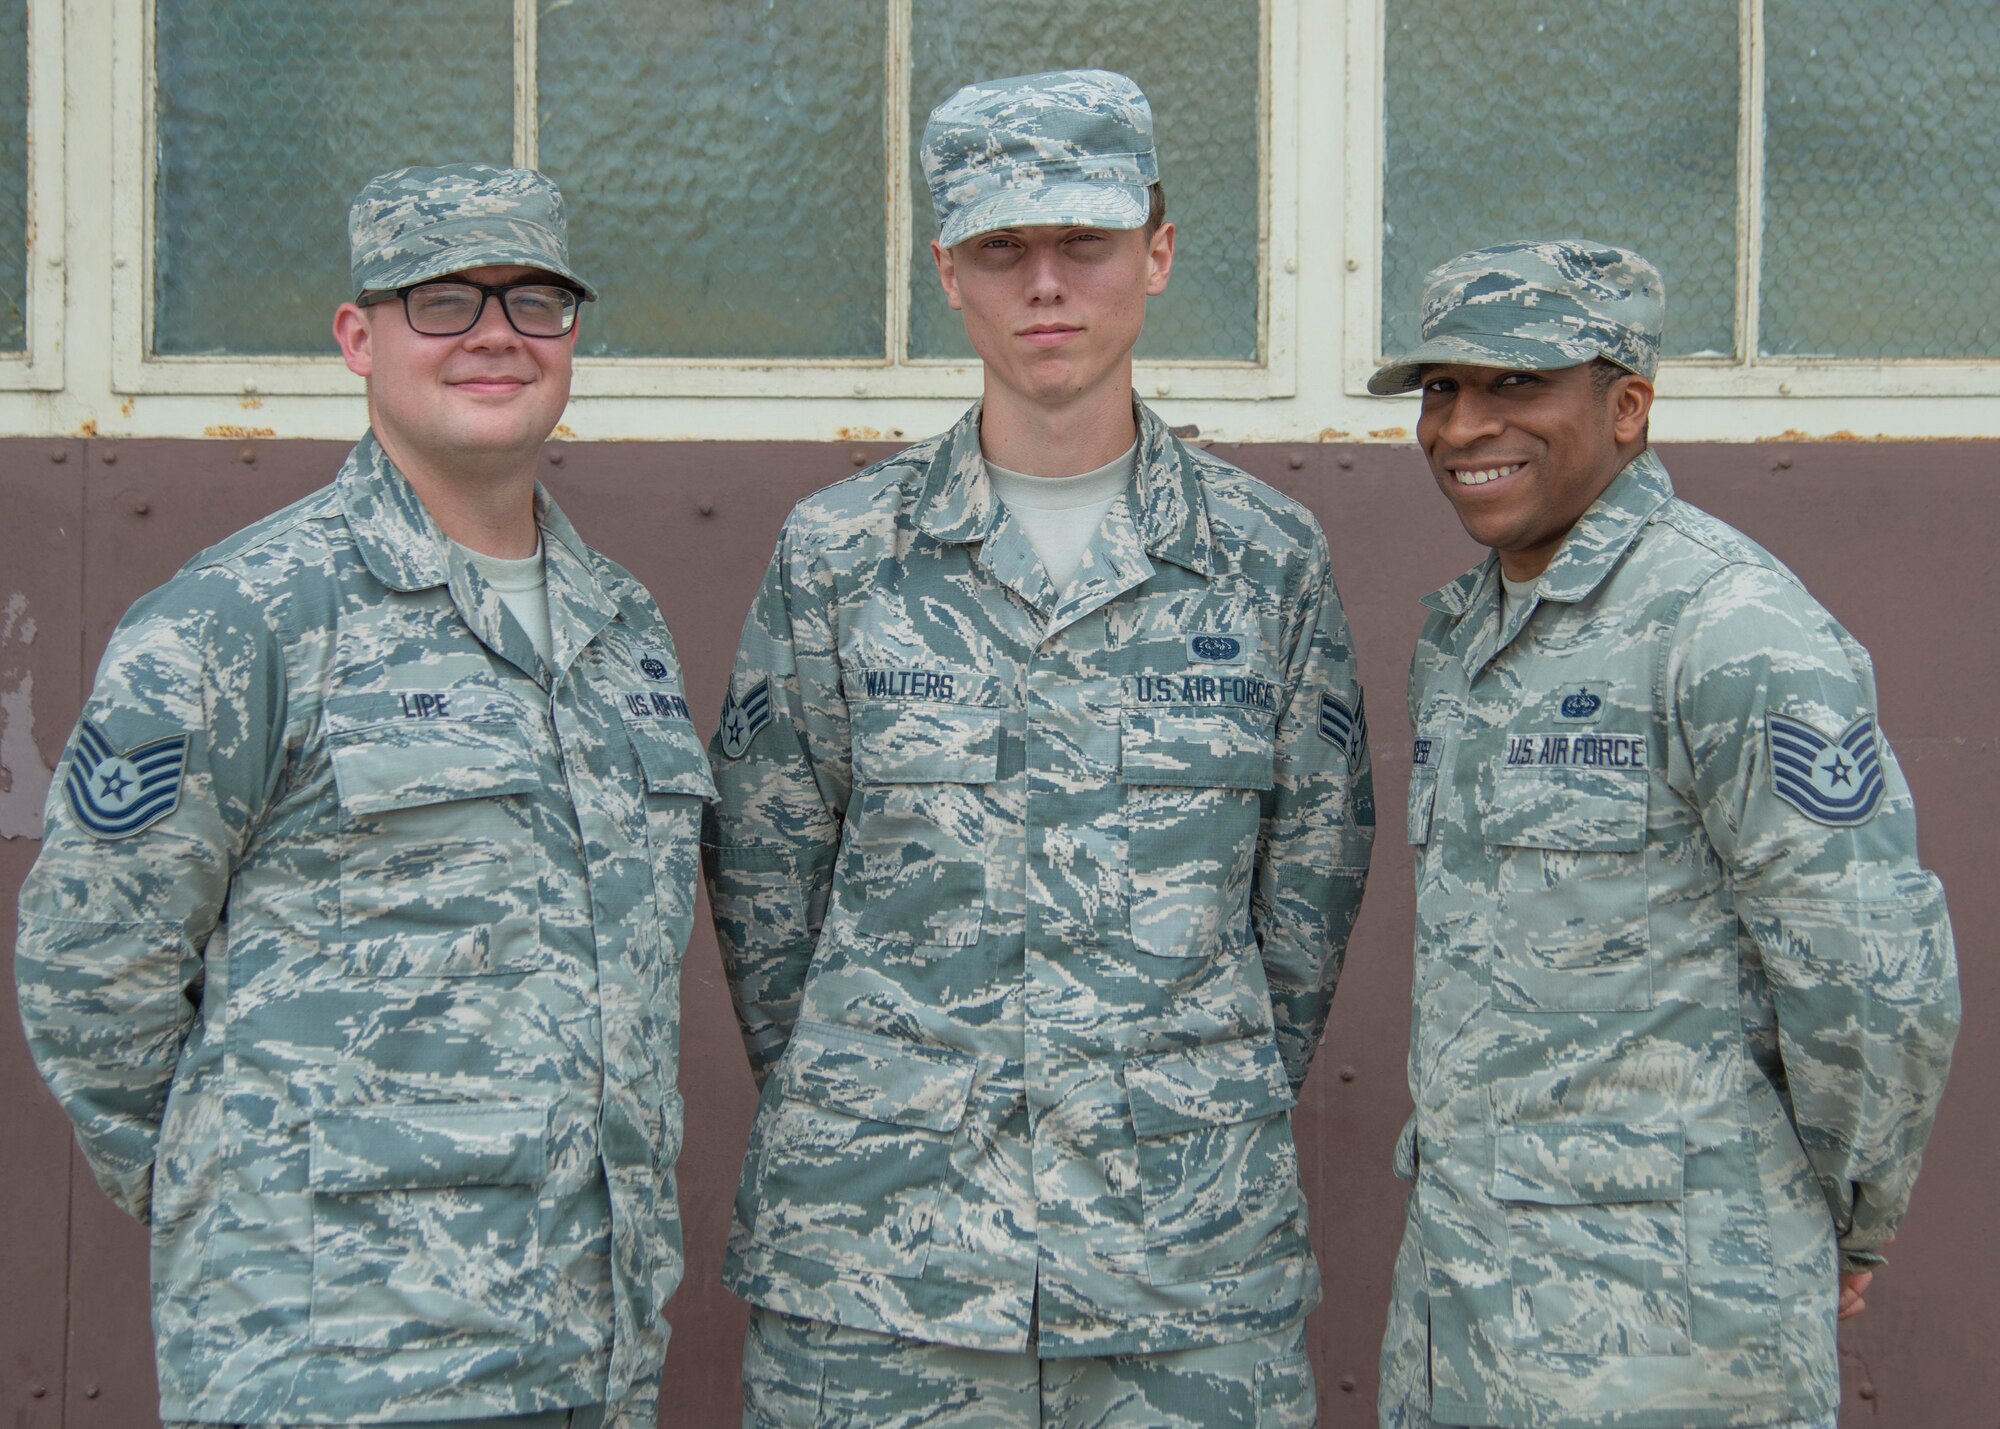 U.S. Air Force Tech. Sgt. Casey Lipe, 792nd Intelligence Support Squadron Mission Defense Team members NCO in charge, Senior Airman Gage Walters, 792nd ISS MDT member, and Tech. Sgt. Lavelle Burgess, 792nd ISS MDT NCOIC of mission defense programming, pose for a group photo at Joint Base Pearl Harbor-Hickam, Hawaii, June 26, 2019. The MDT created the Functional Research Innovation Systems for Brainstorming and Evaluation Environment, or FRISBEE Lab, as a virtual testing ground for their shop, which has become an integral training tool. (U.S. Air Force photo by Senior Airman Douglas Lorance)